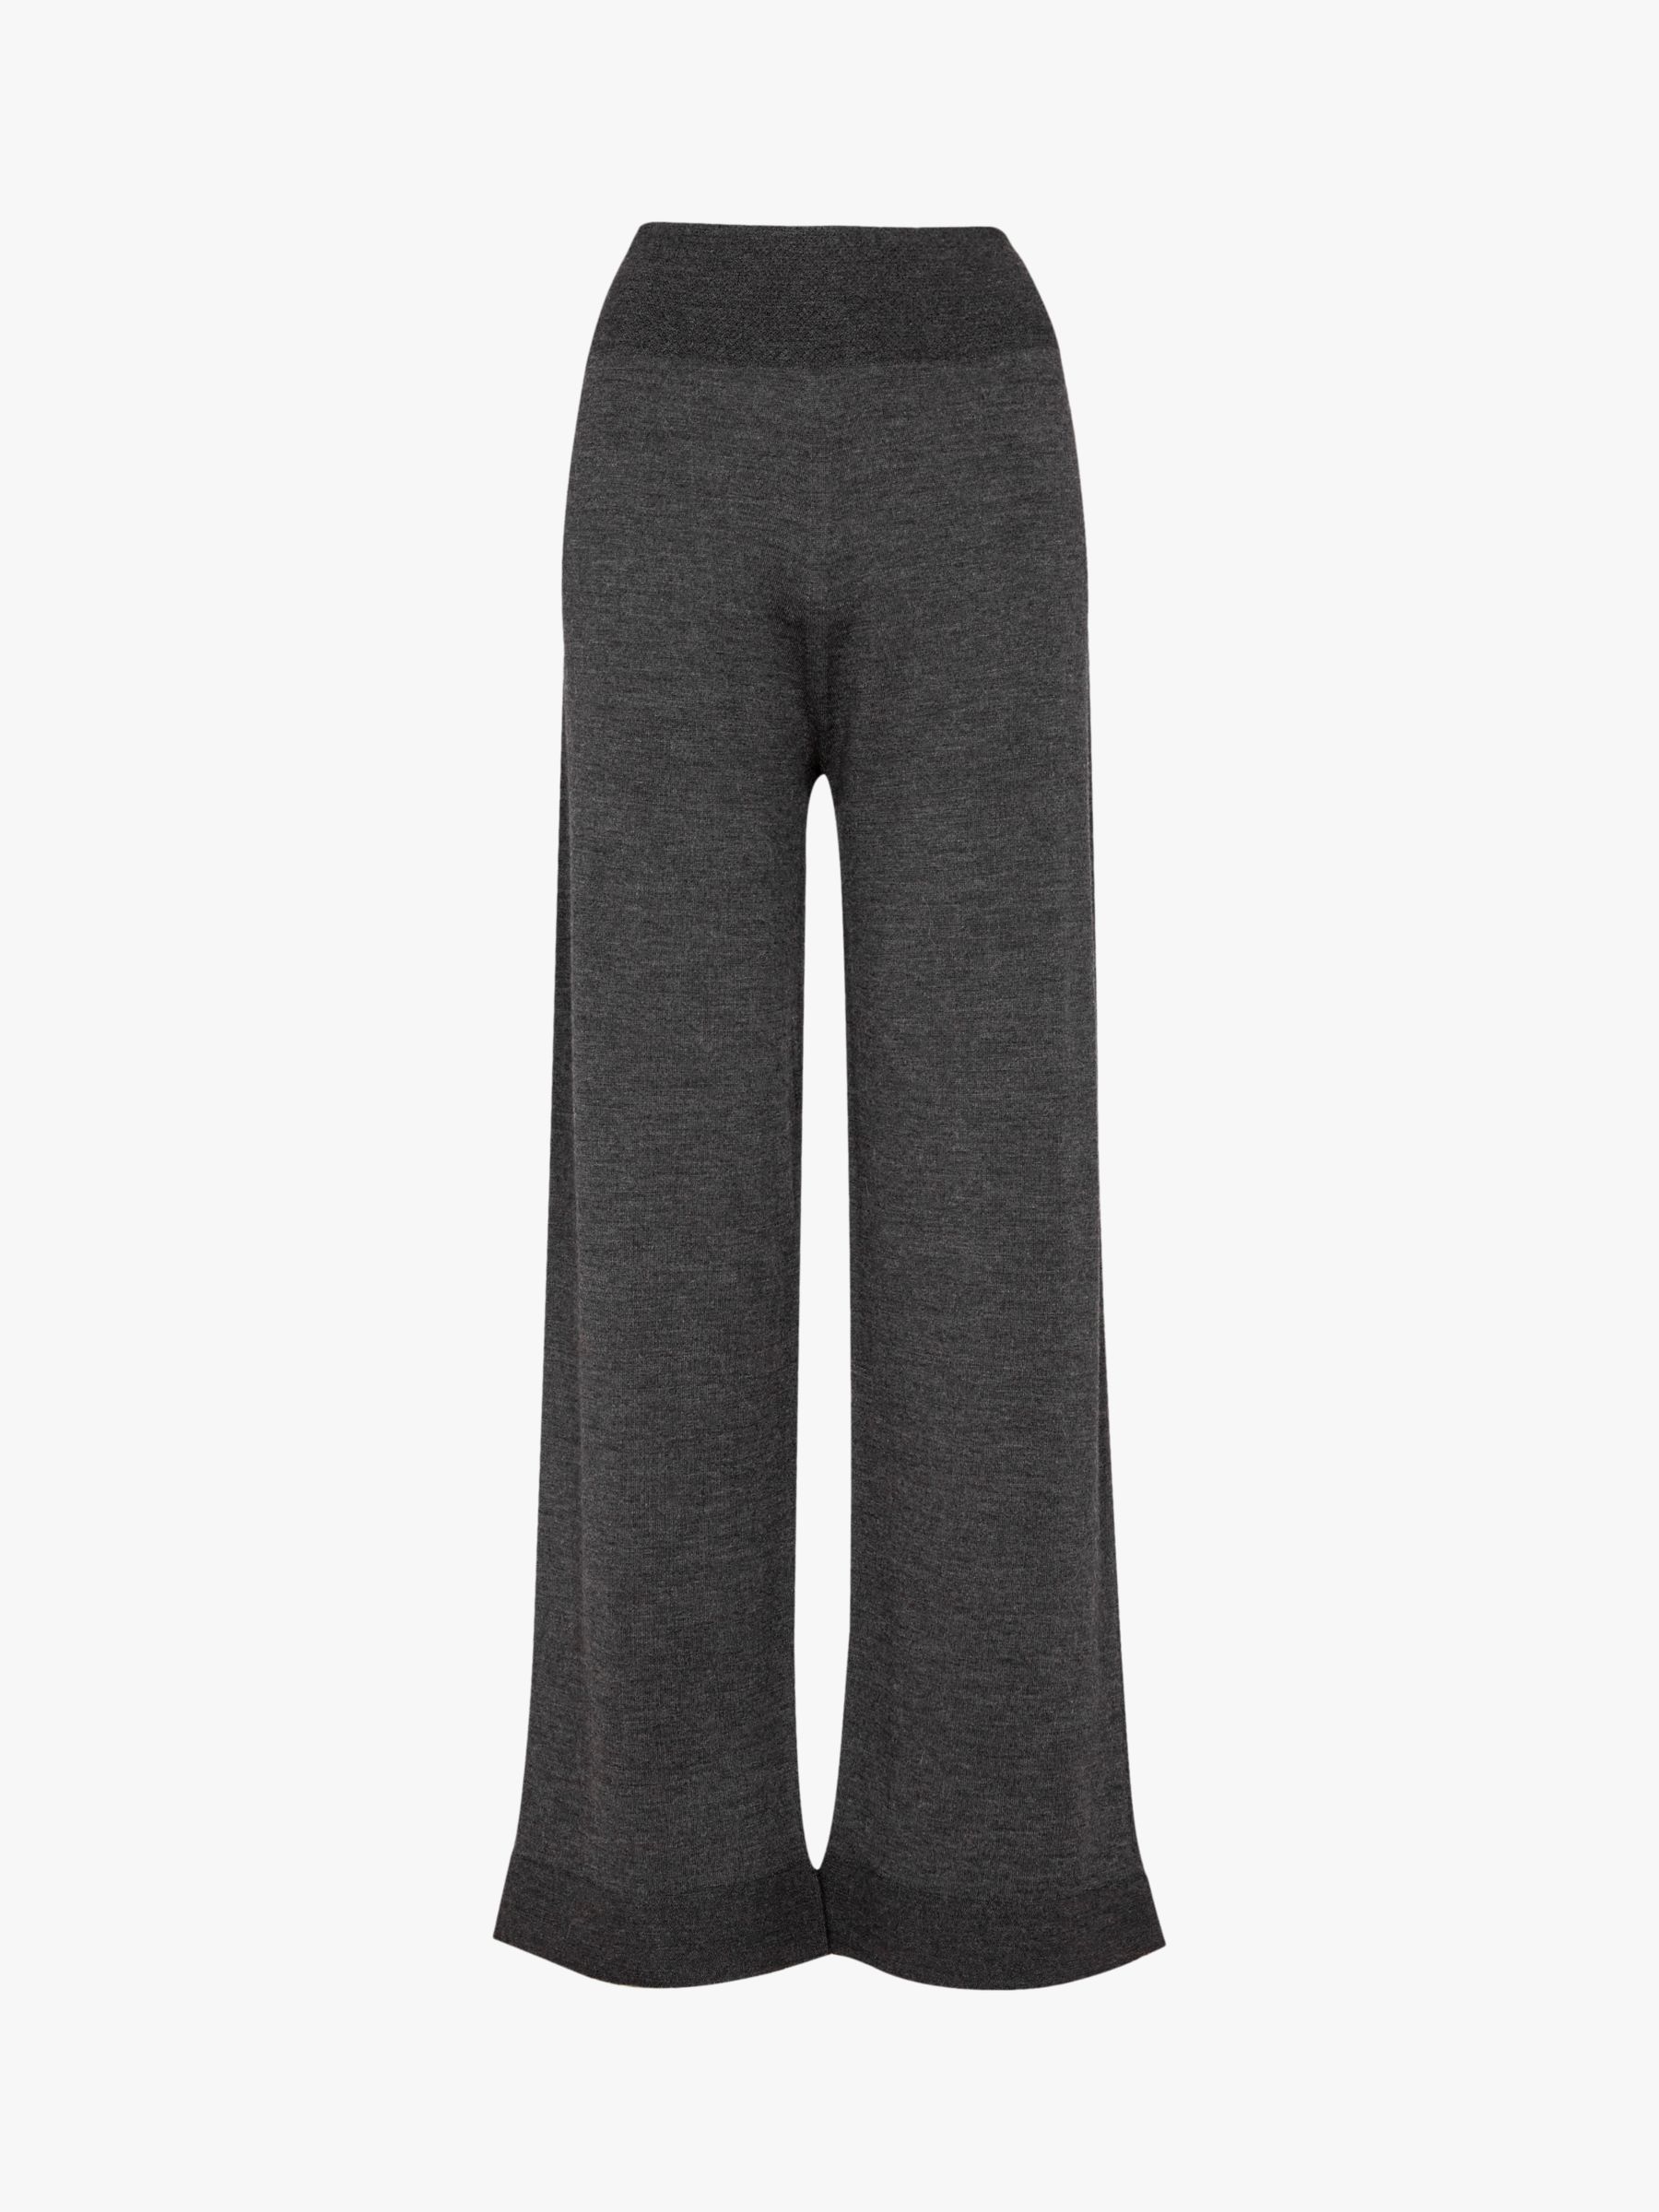 Celtic & Co. Wool Lounge Trousers, Charcoal, XS